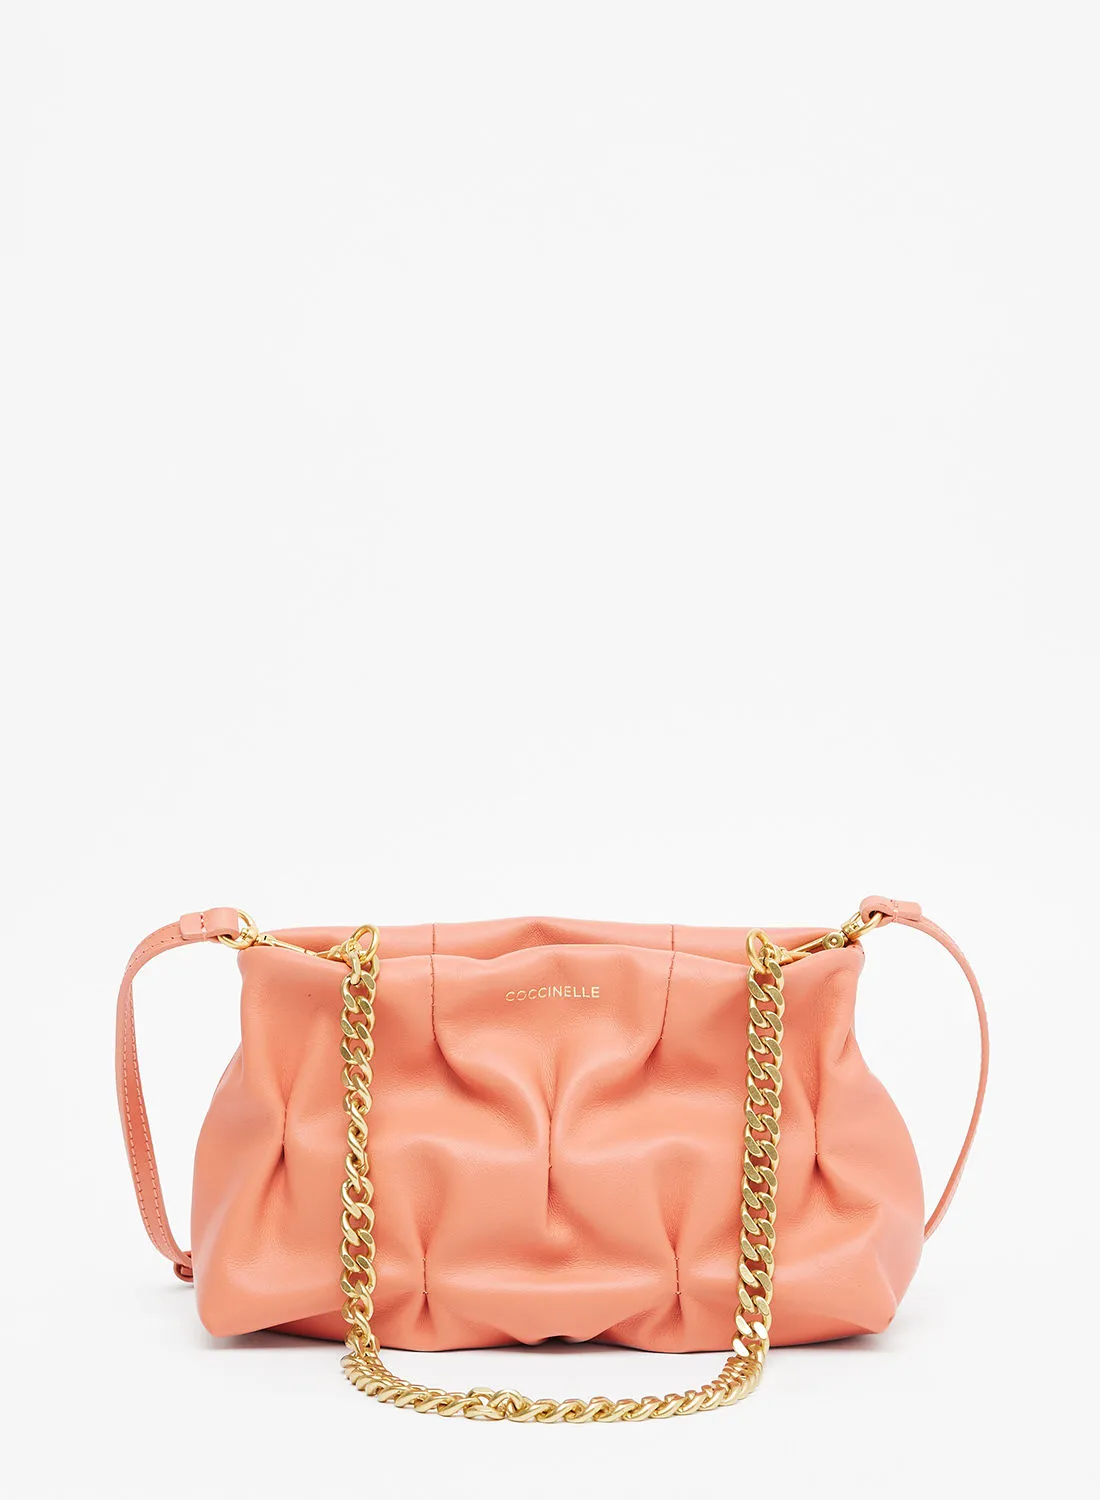 COCCINELLE Ophelie Goodie Chain Detail Shoulder Bag